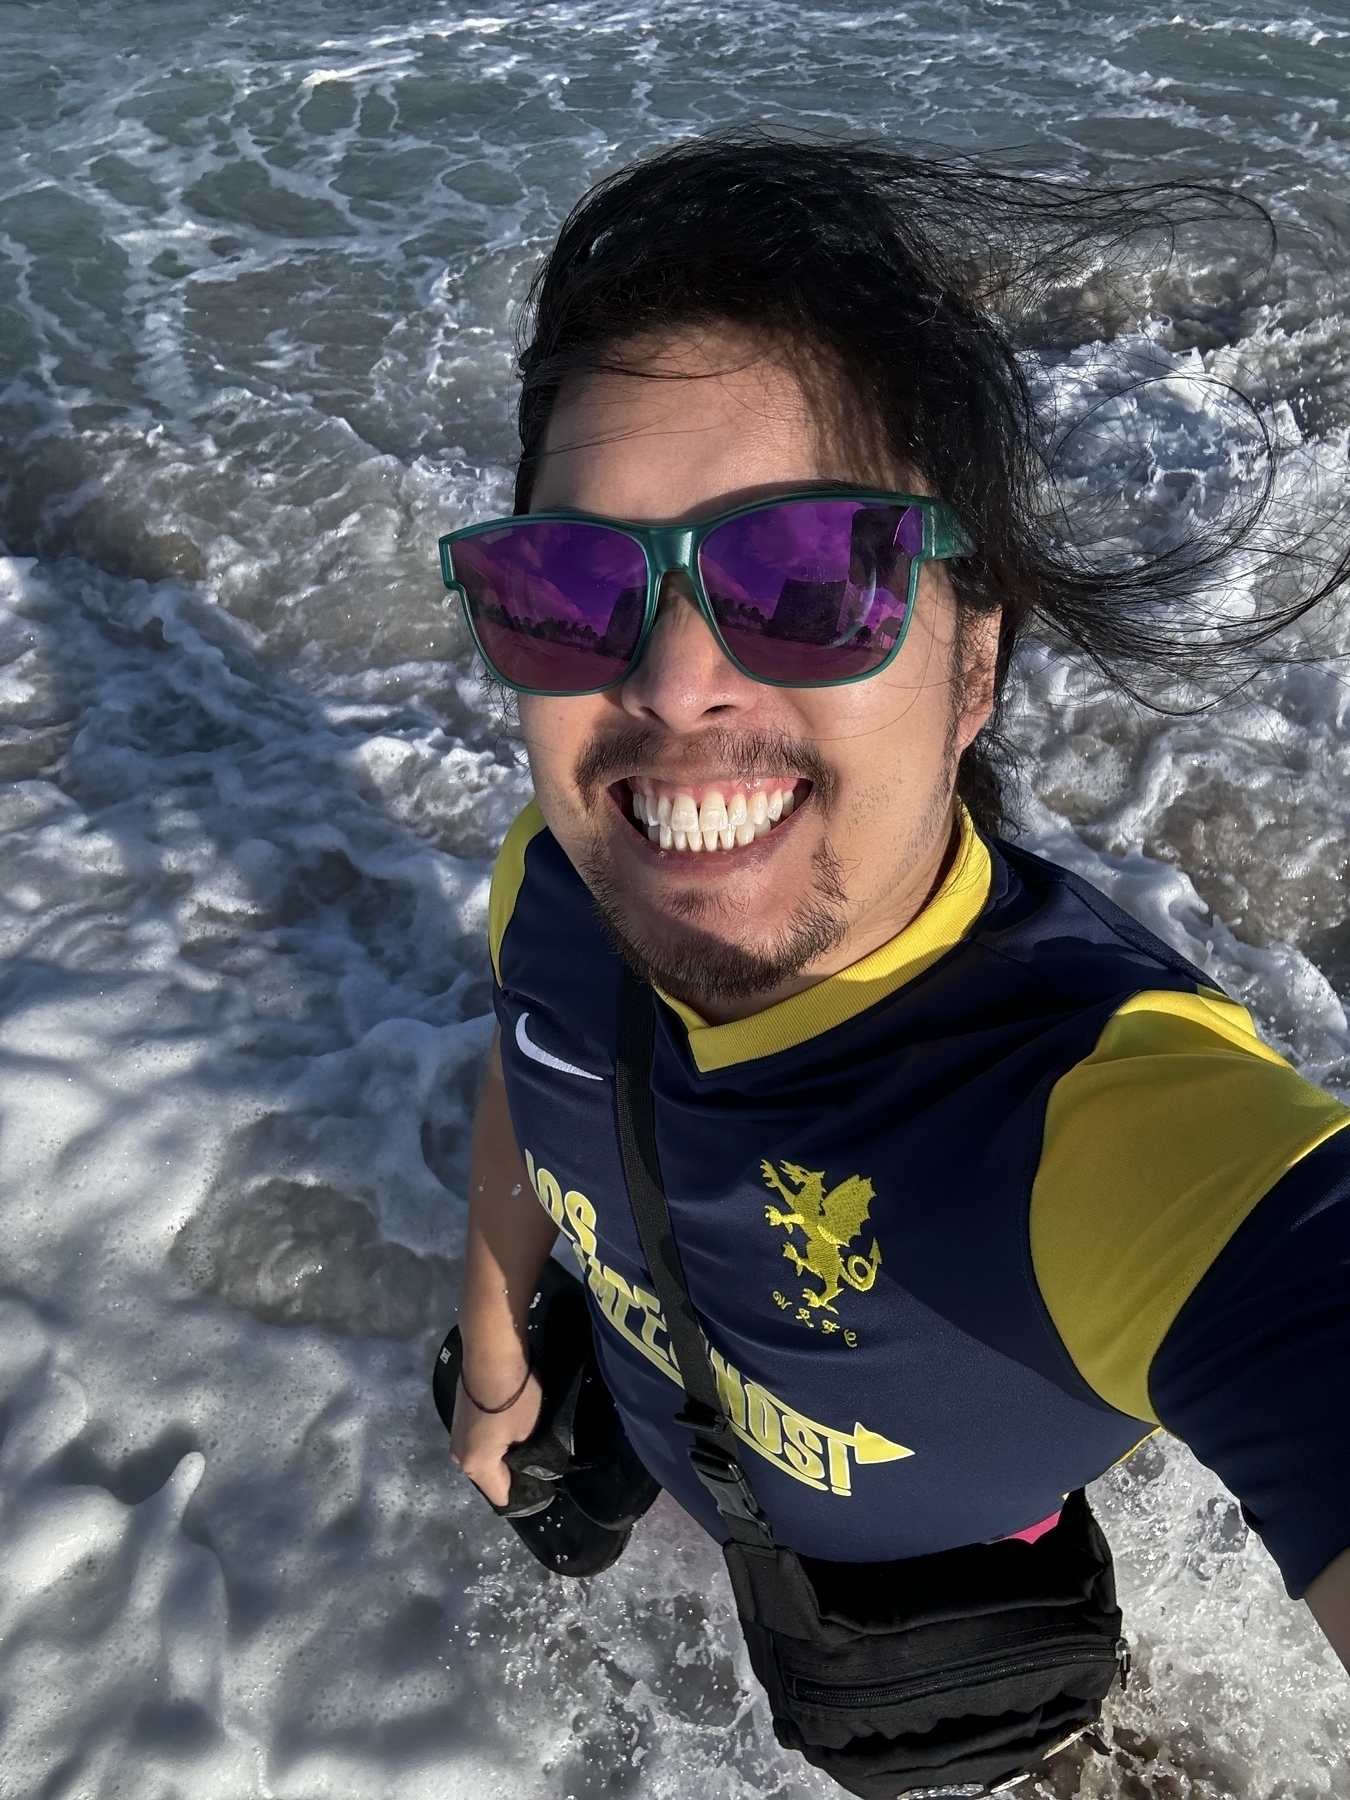 Miguel a masc Filipino man standing in the Atlantic ocean in the daytime wearing sunglasses 